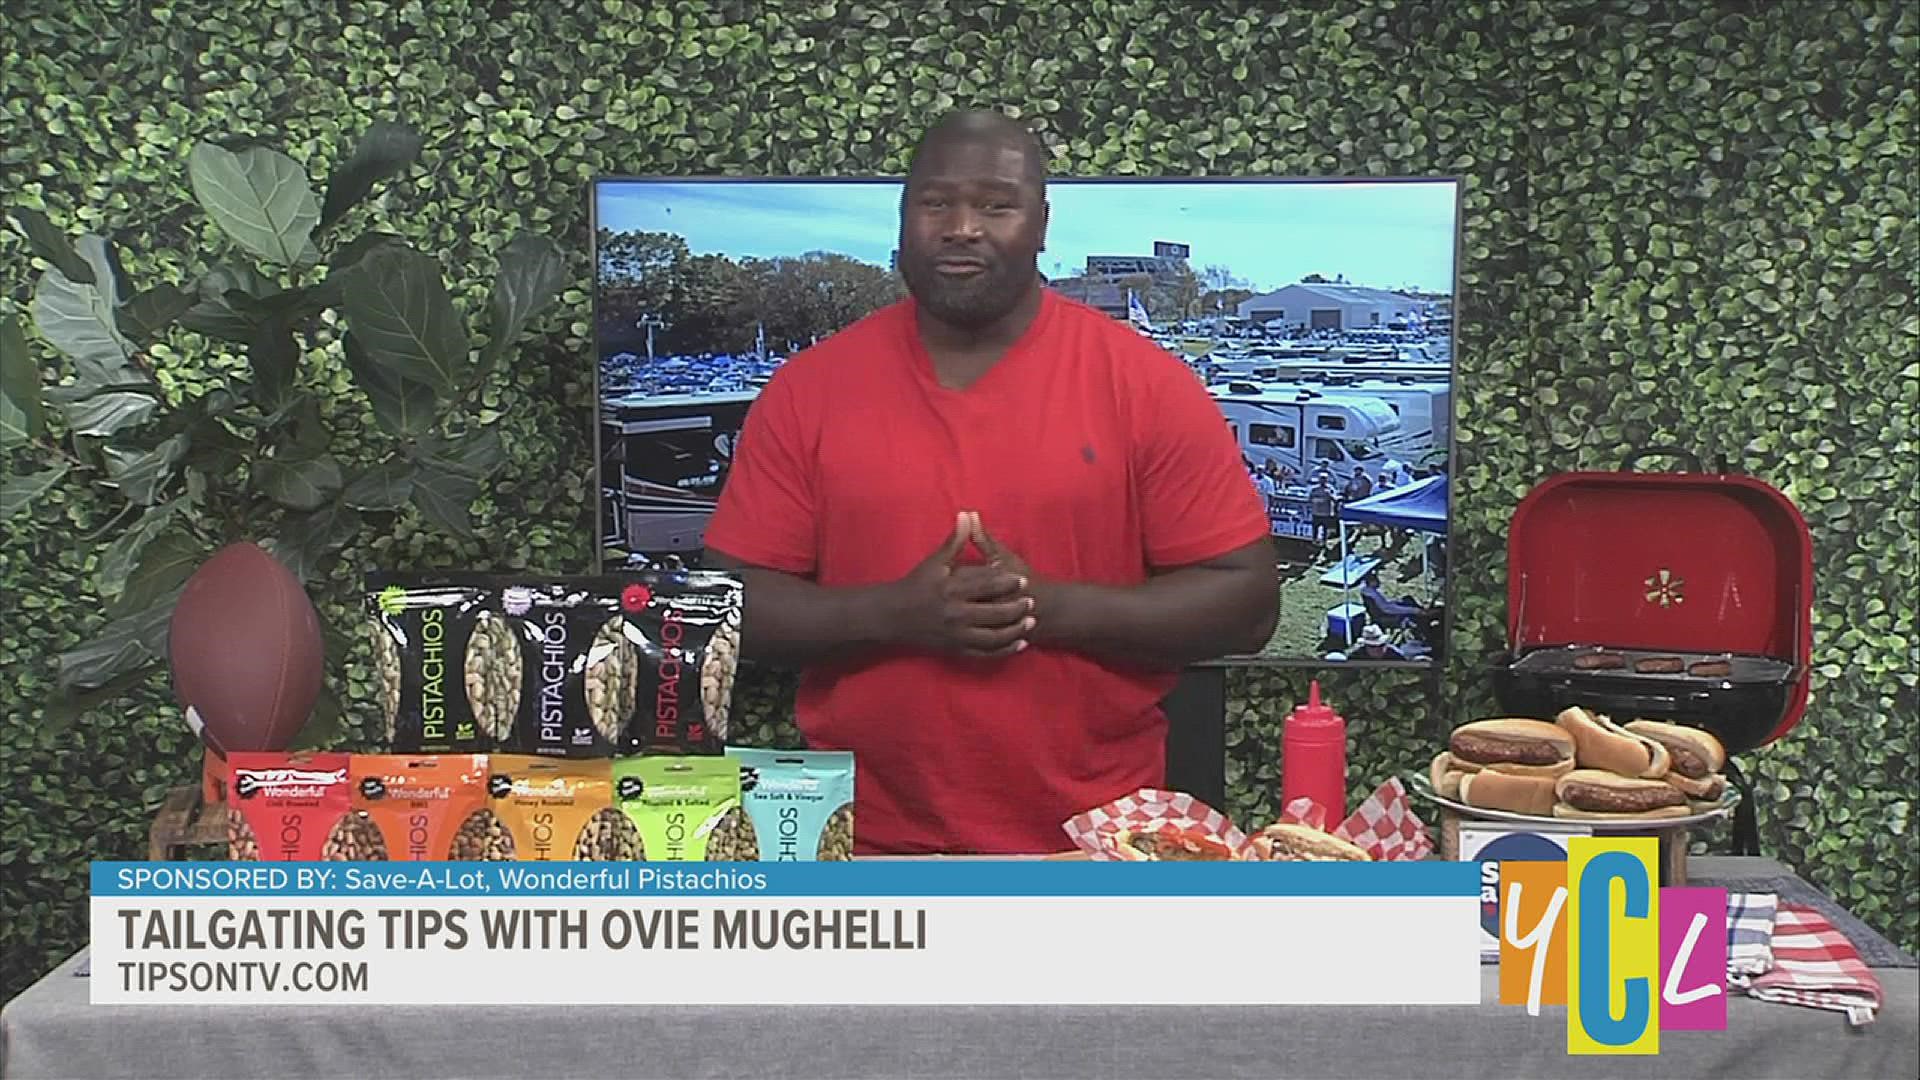 Former NFL Pro, Ovie Mughelli, talks about his tips for a successful tailgating experience! This segment is paid for by Save-A-Lot and Wonderful Pistachios.